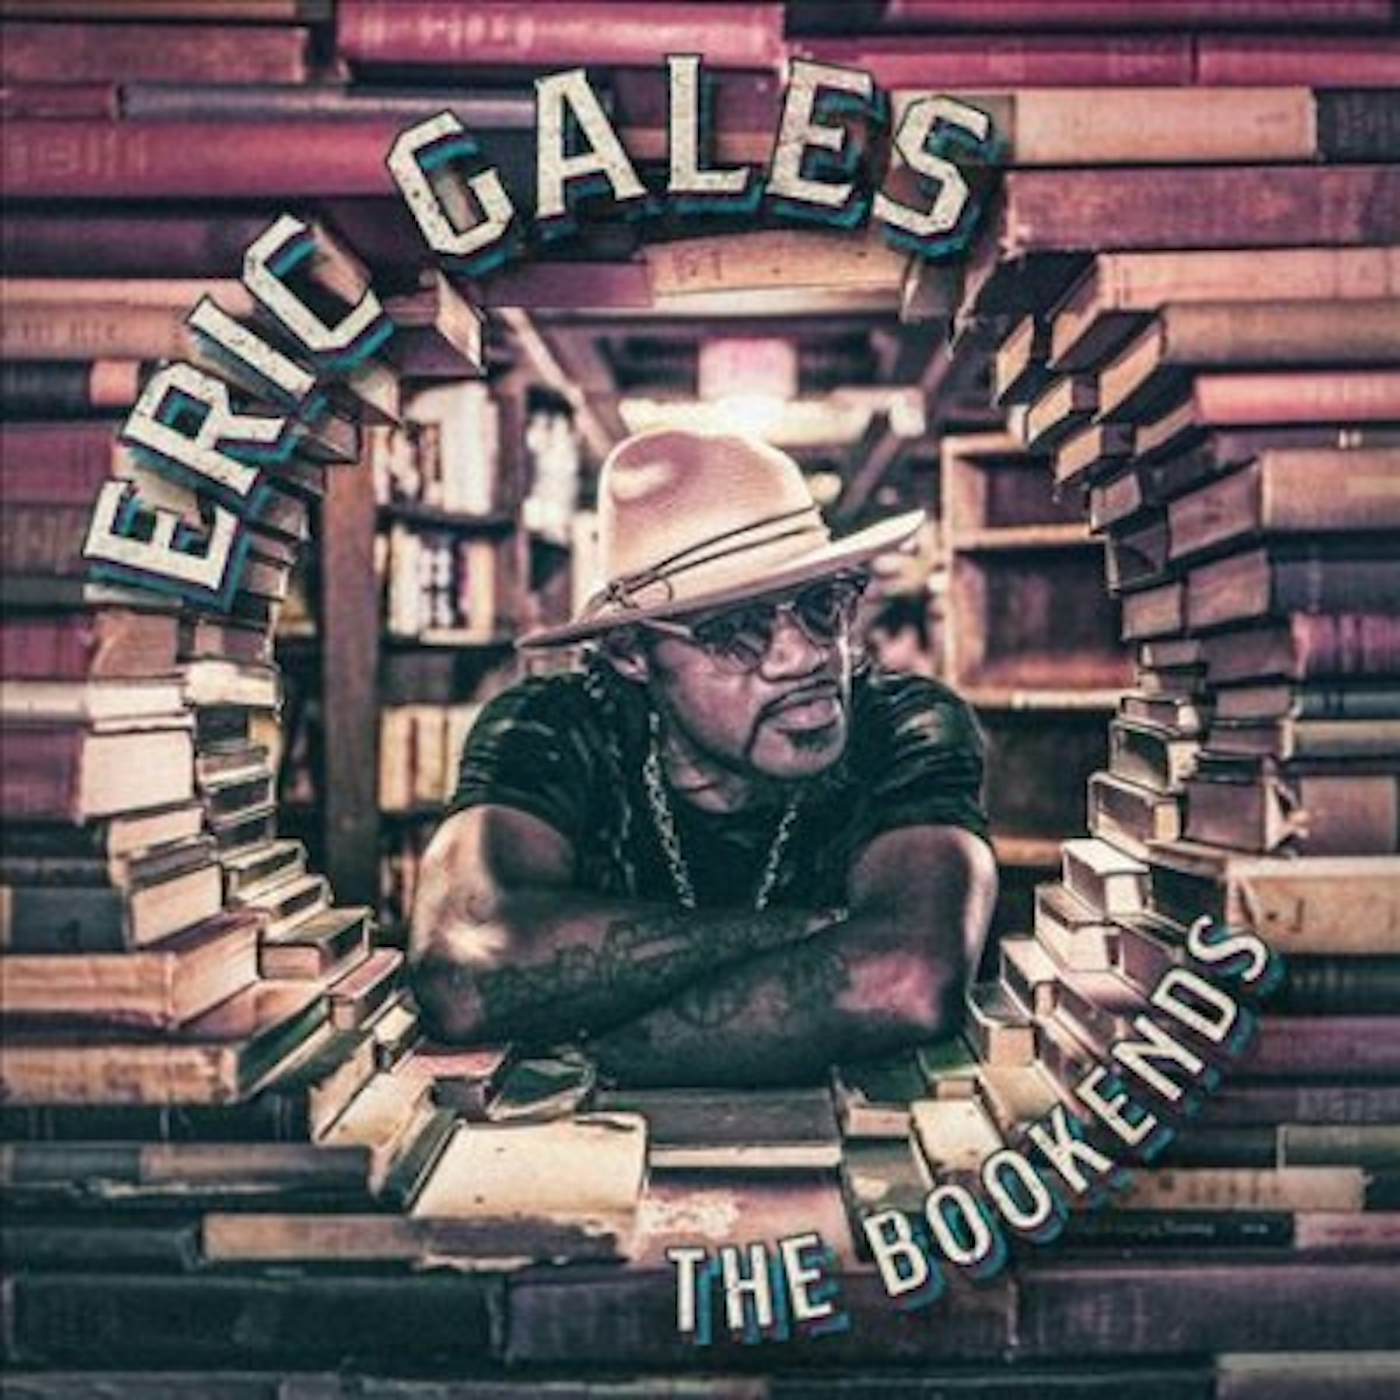 Eric Gales Bookends CD